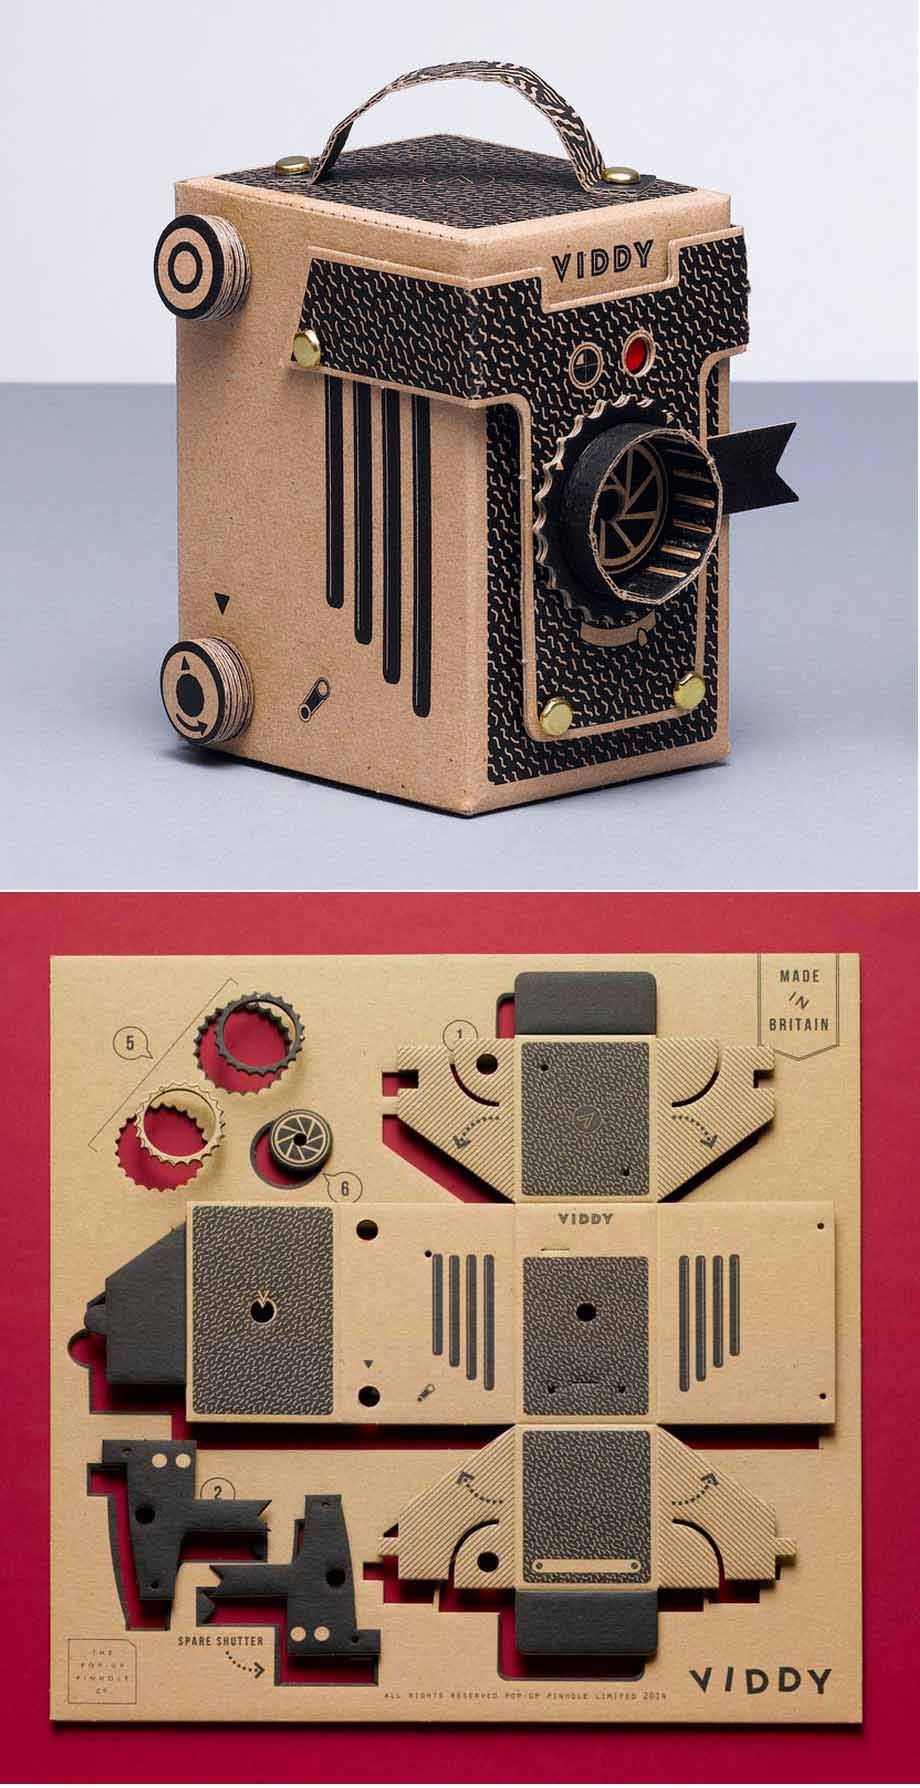 Papercraft Camera Viddy is A Do It Yourself Pinhole Camera Kit Made From tough